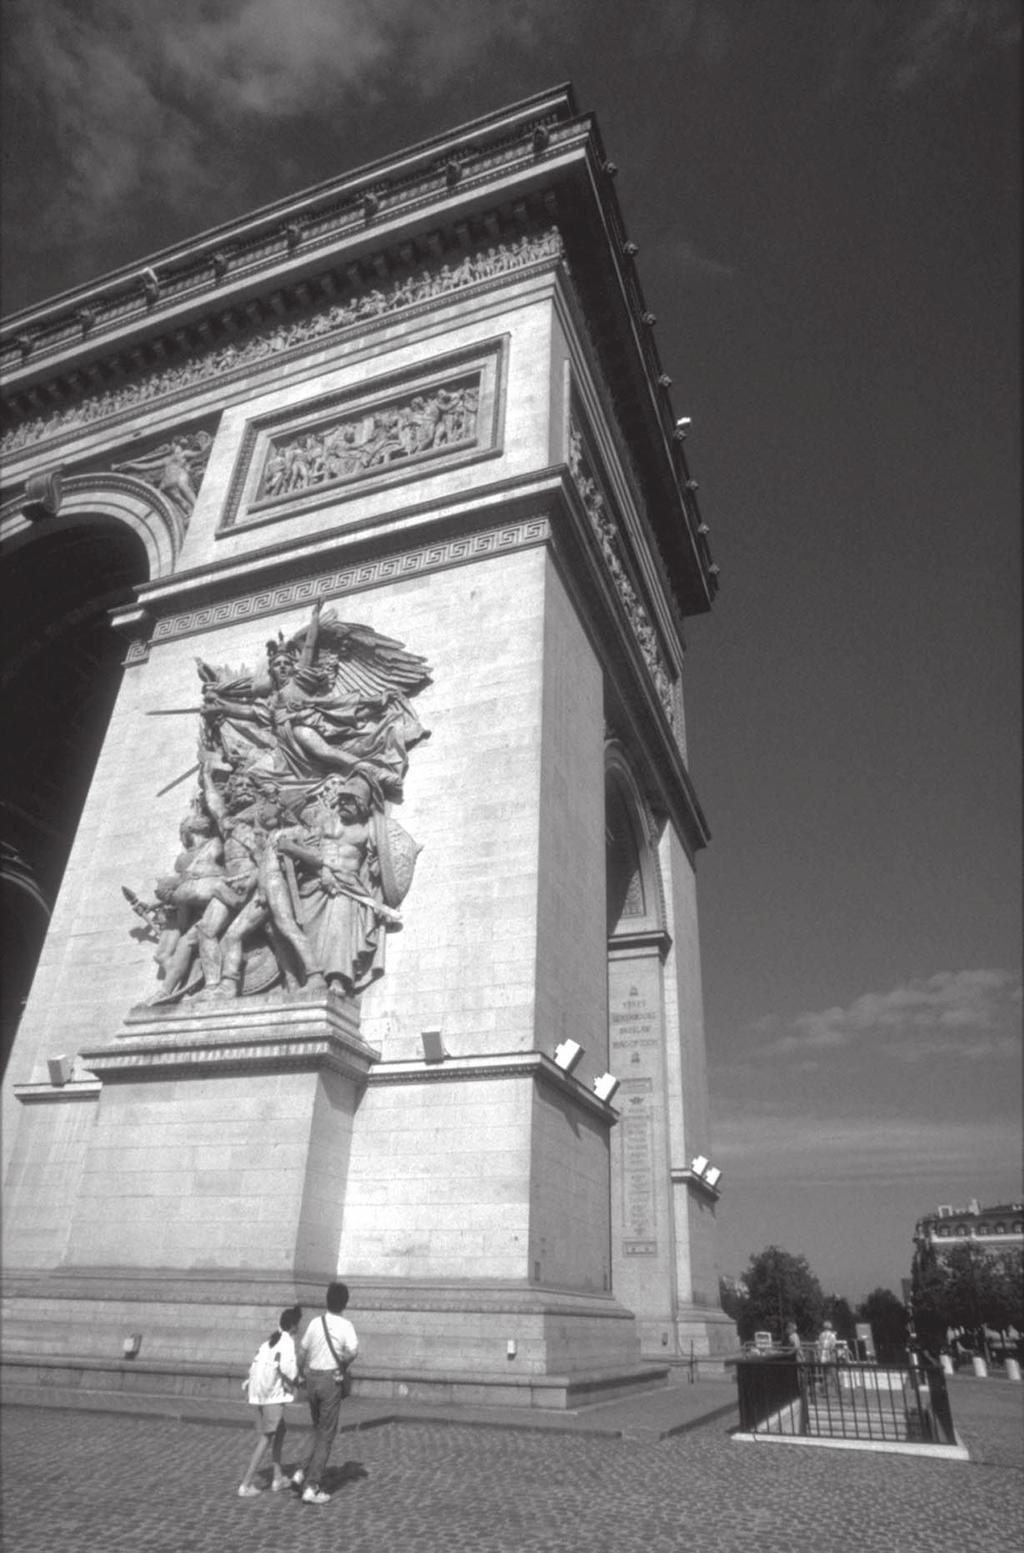 100 Jøran Rudi Figure 4. Arc de Triomphe. A: The technology is a tool and a means to an end. The basic aesthetics have not been changed by technology as much as they have evolved.